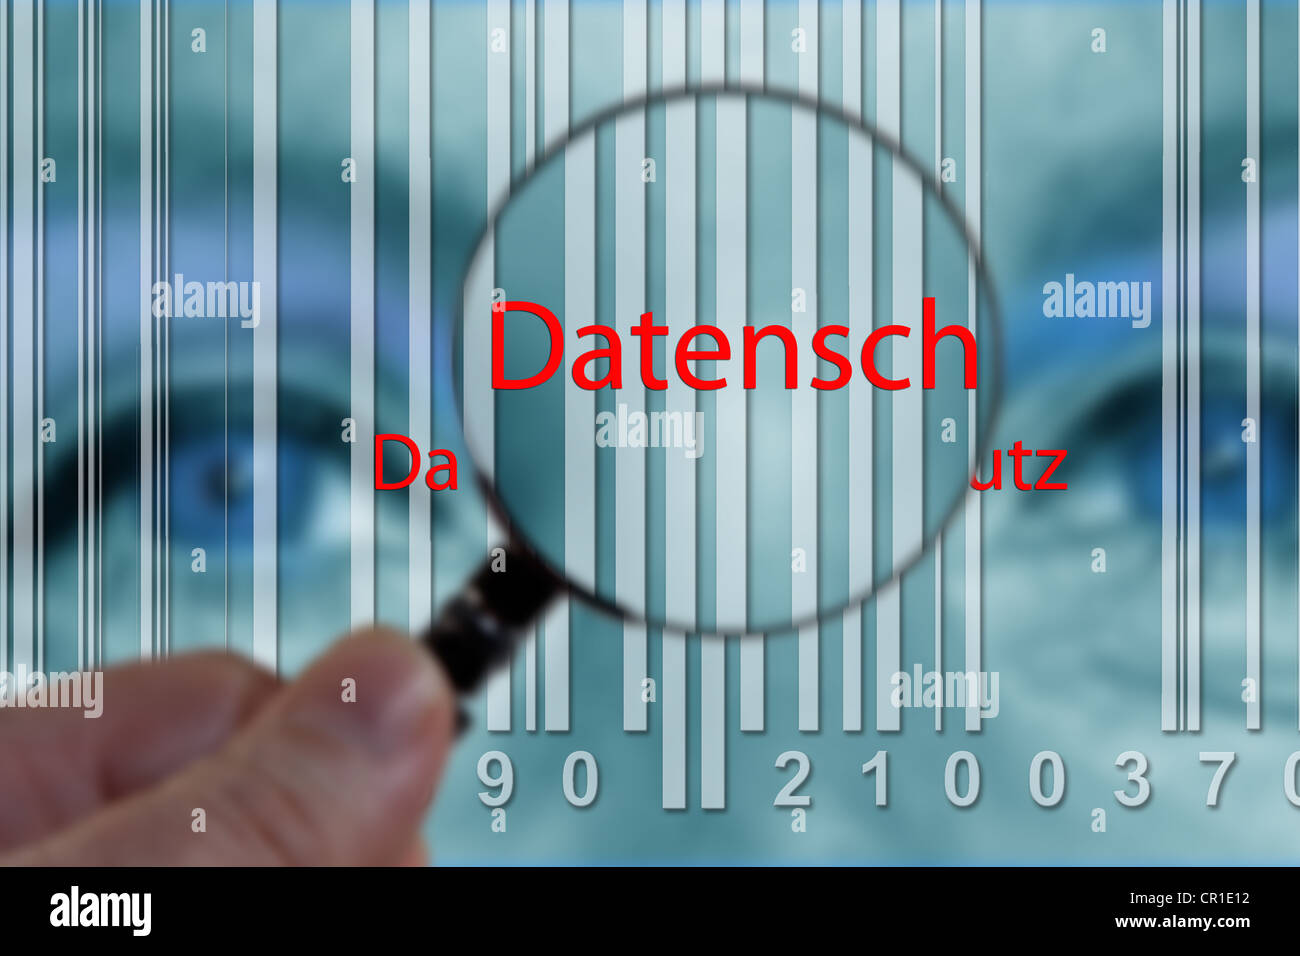 Datenschutz or data security under the magnifying glass Stock Photo